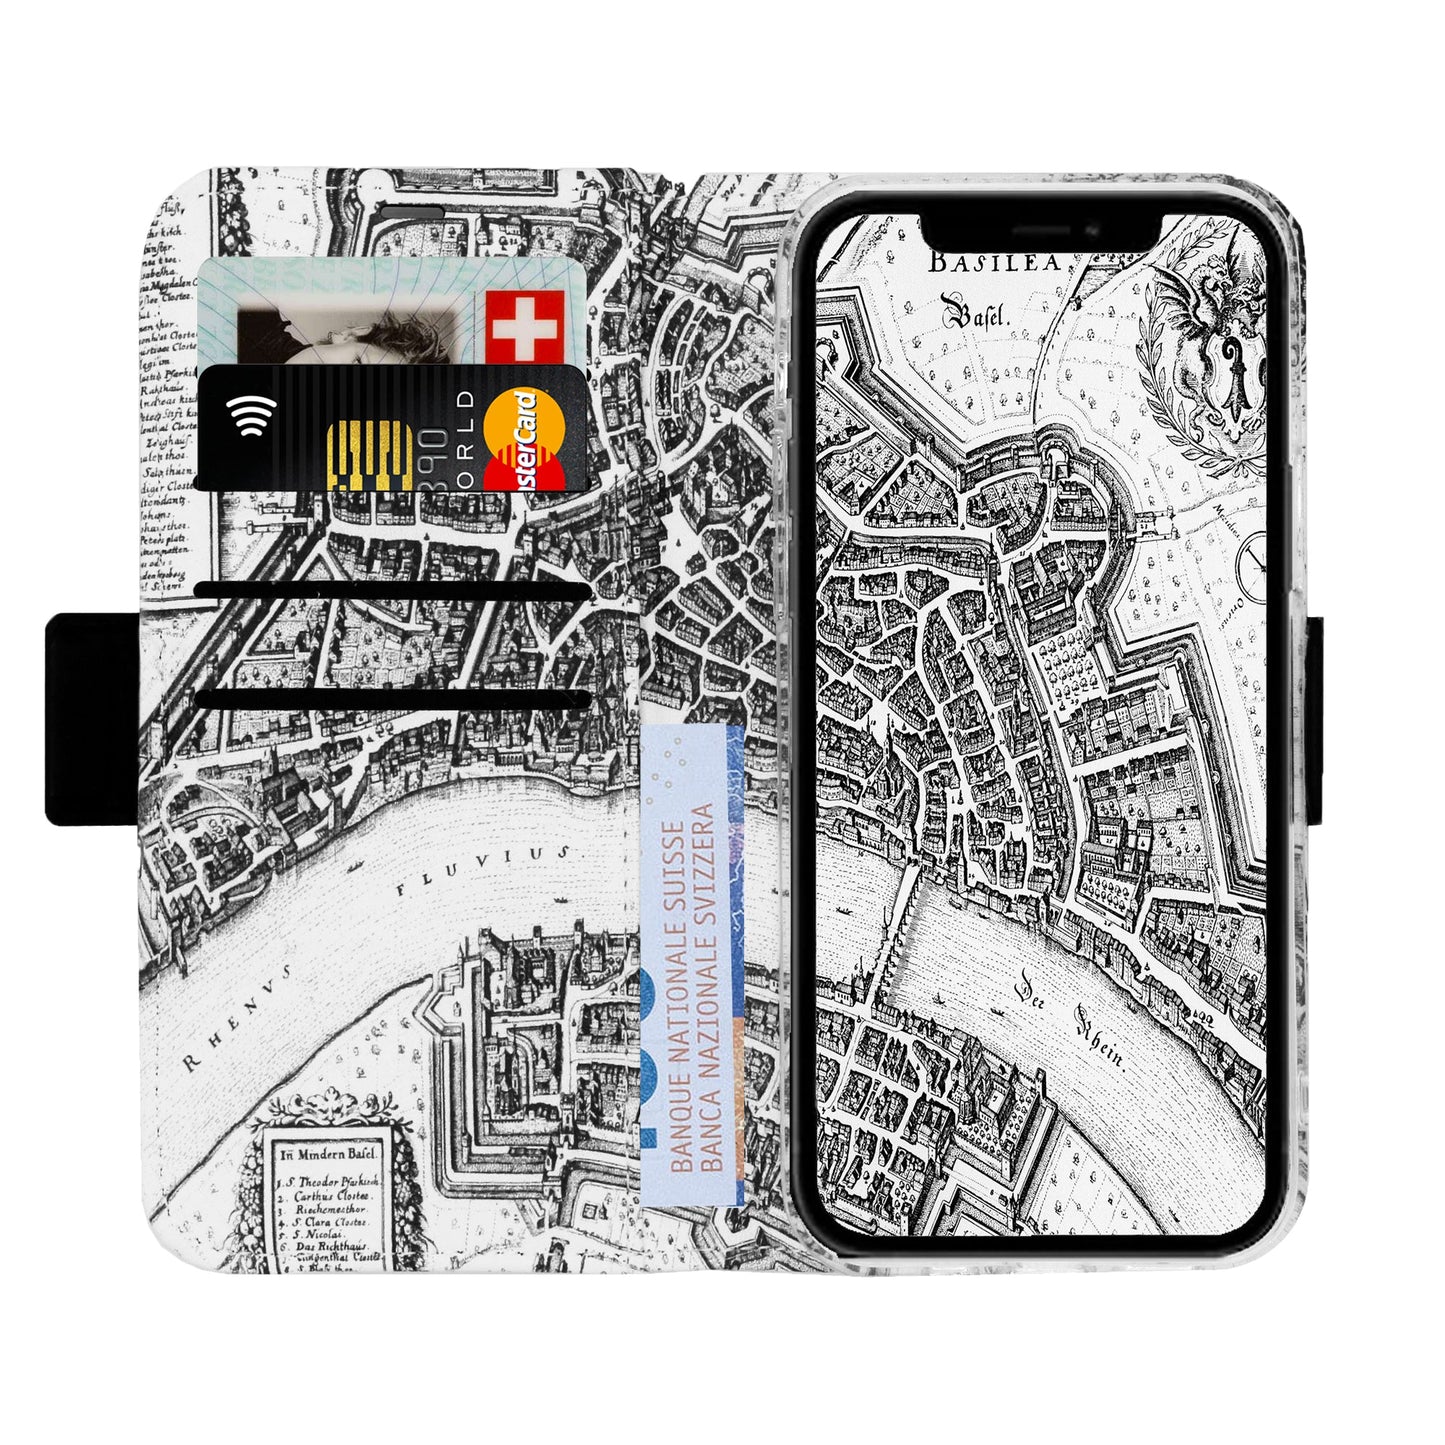 Basel Merian Victor Case for iPhone XS Max